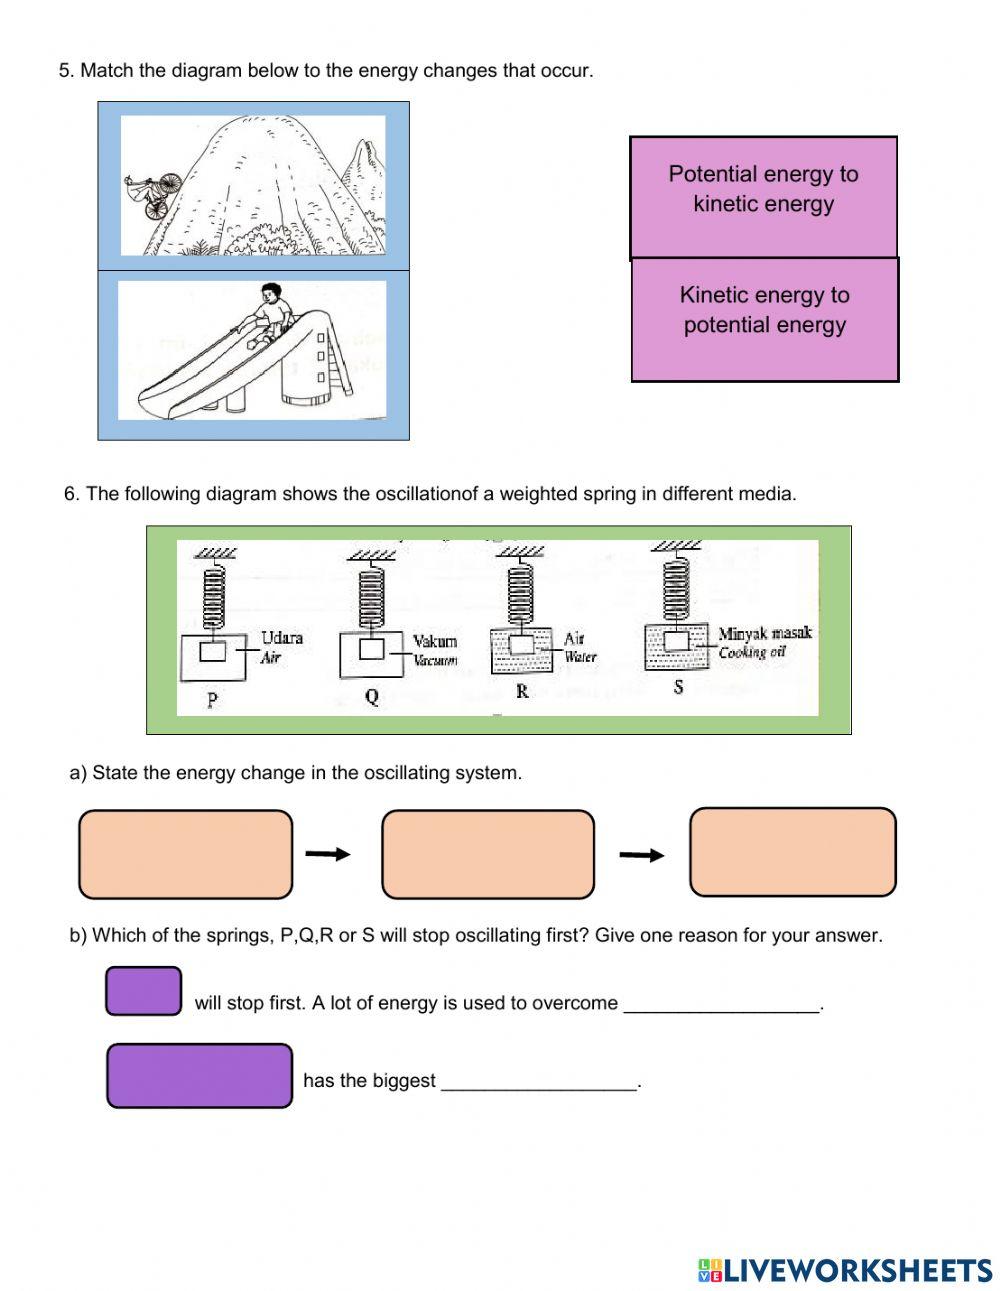 Principle of conservation of energy